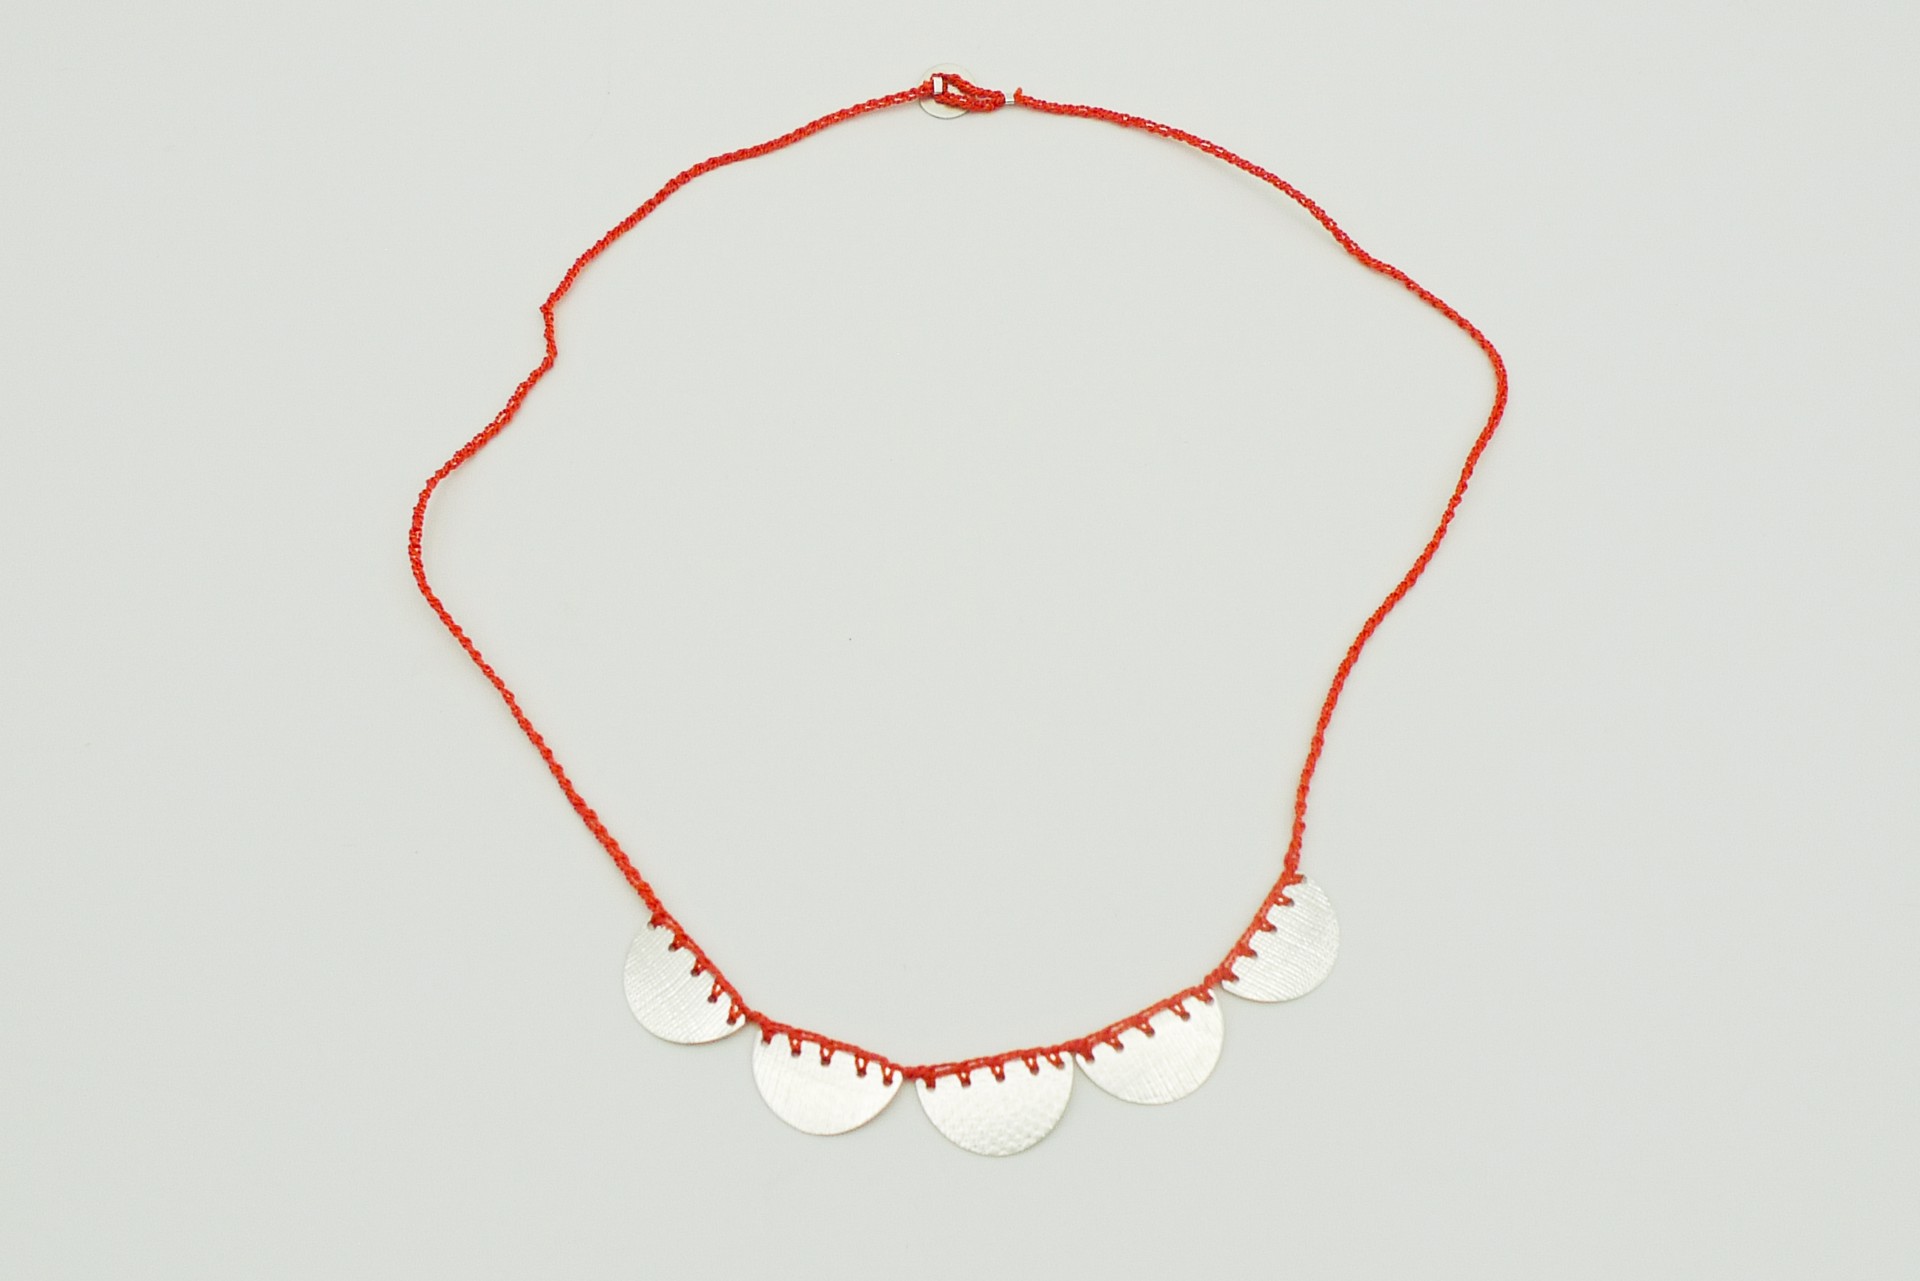 Coral Necklace by Erica Schlueter